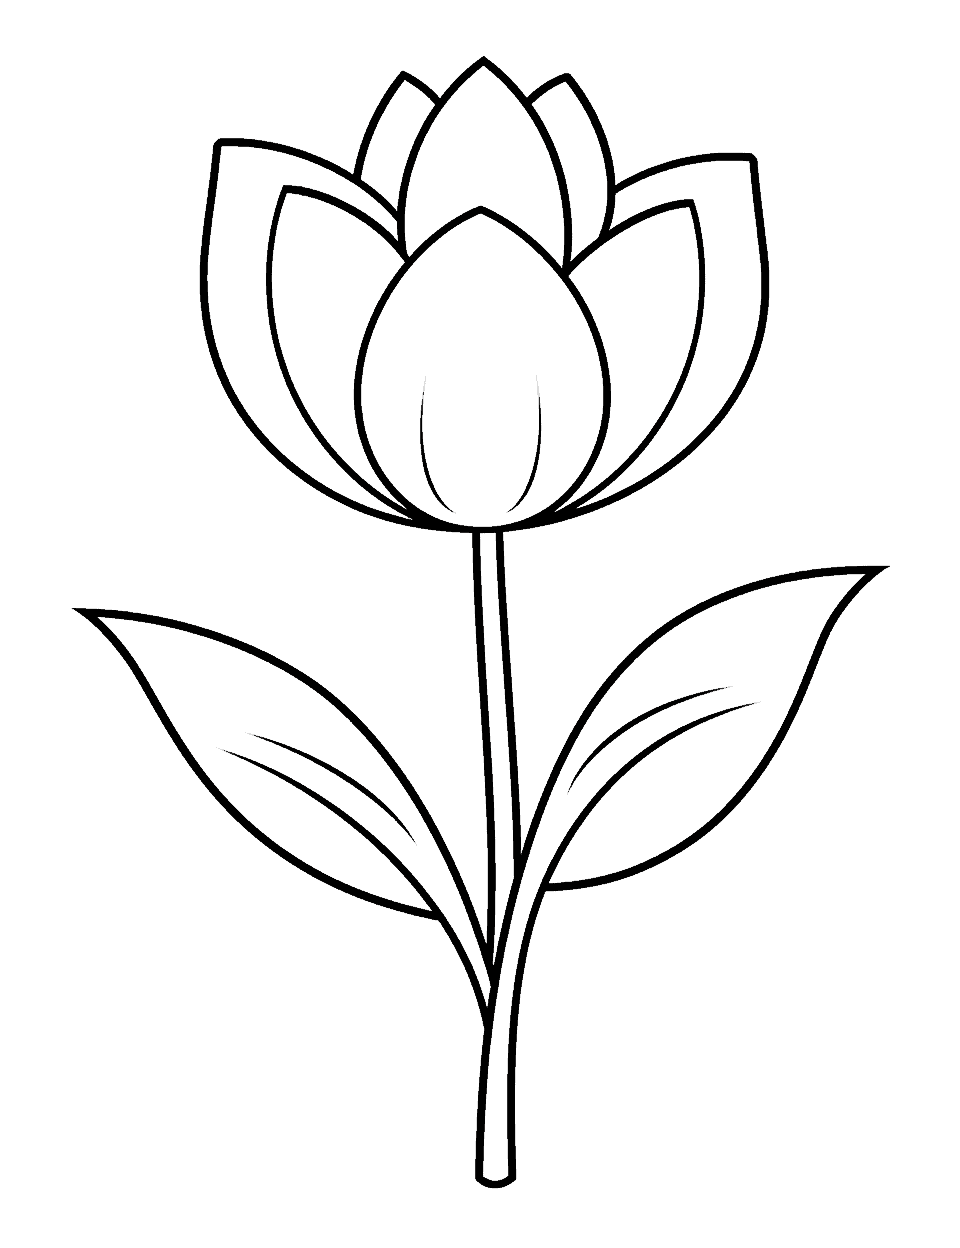 Easy and Cute Tulip Flower Coloring Page - A large, easy-to-color tulip with a cute design.